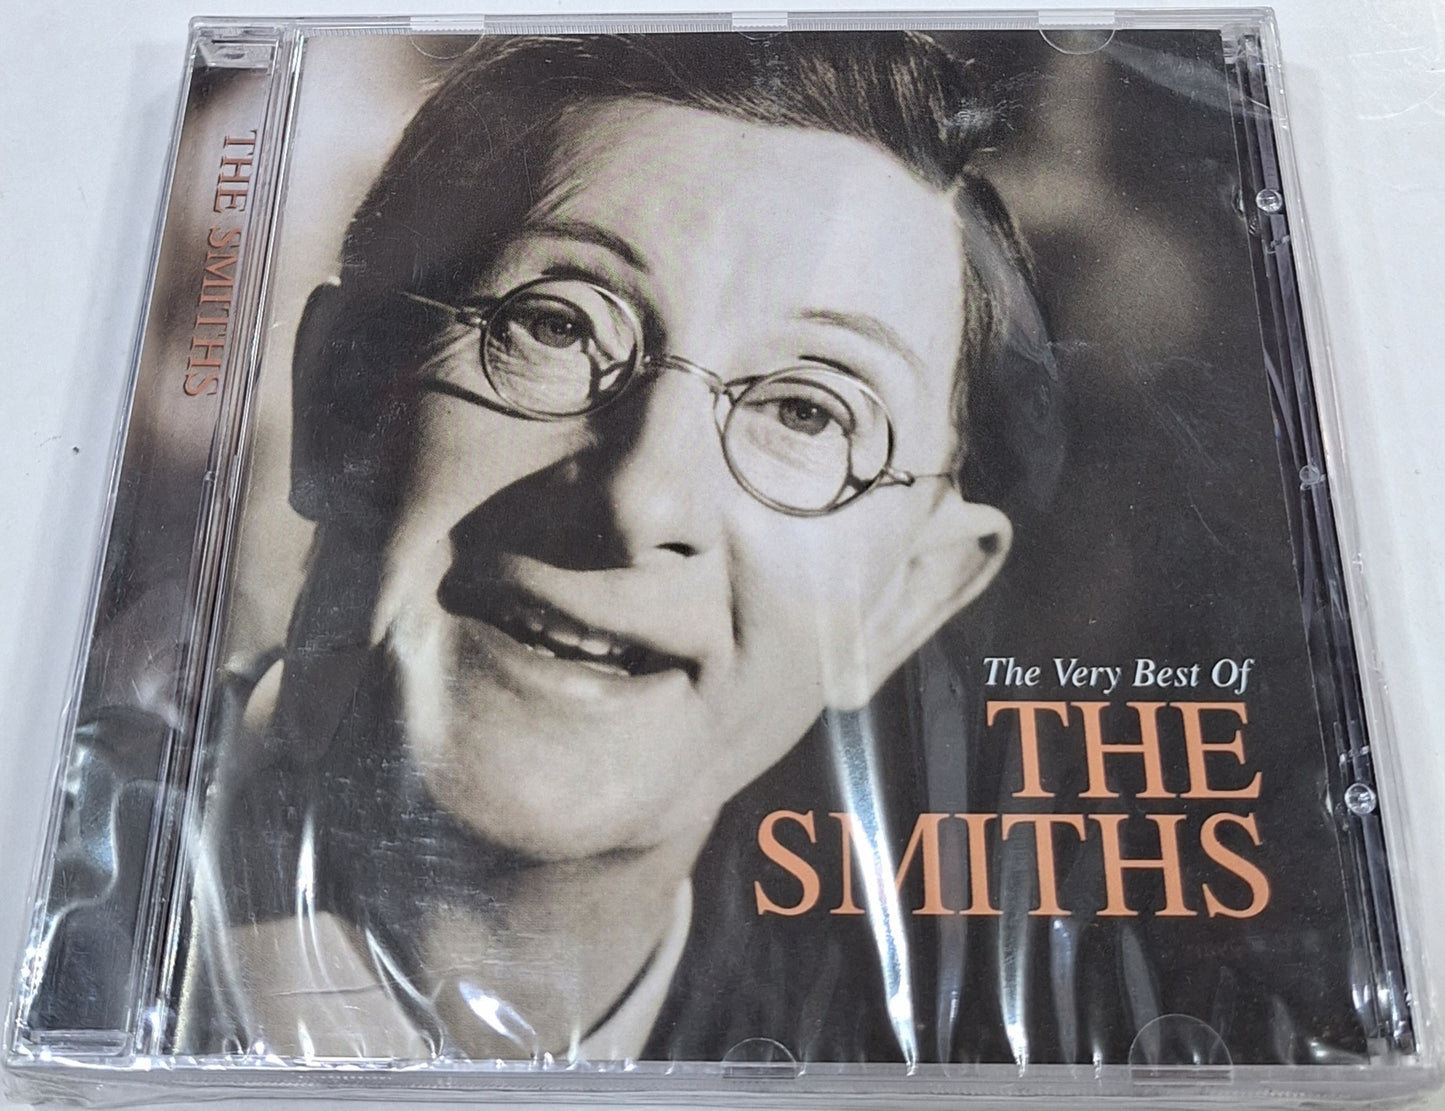 THE SMITHS - THE VERY BEST OF  CD